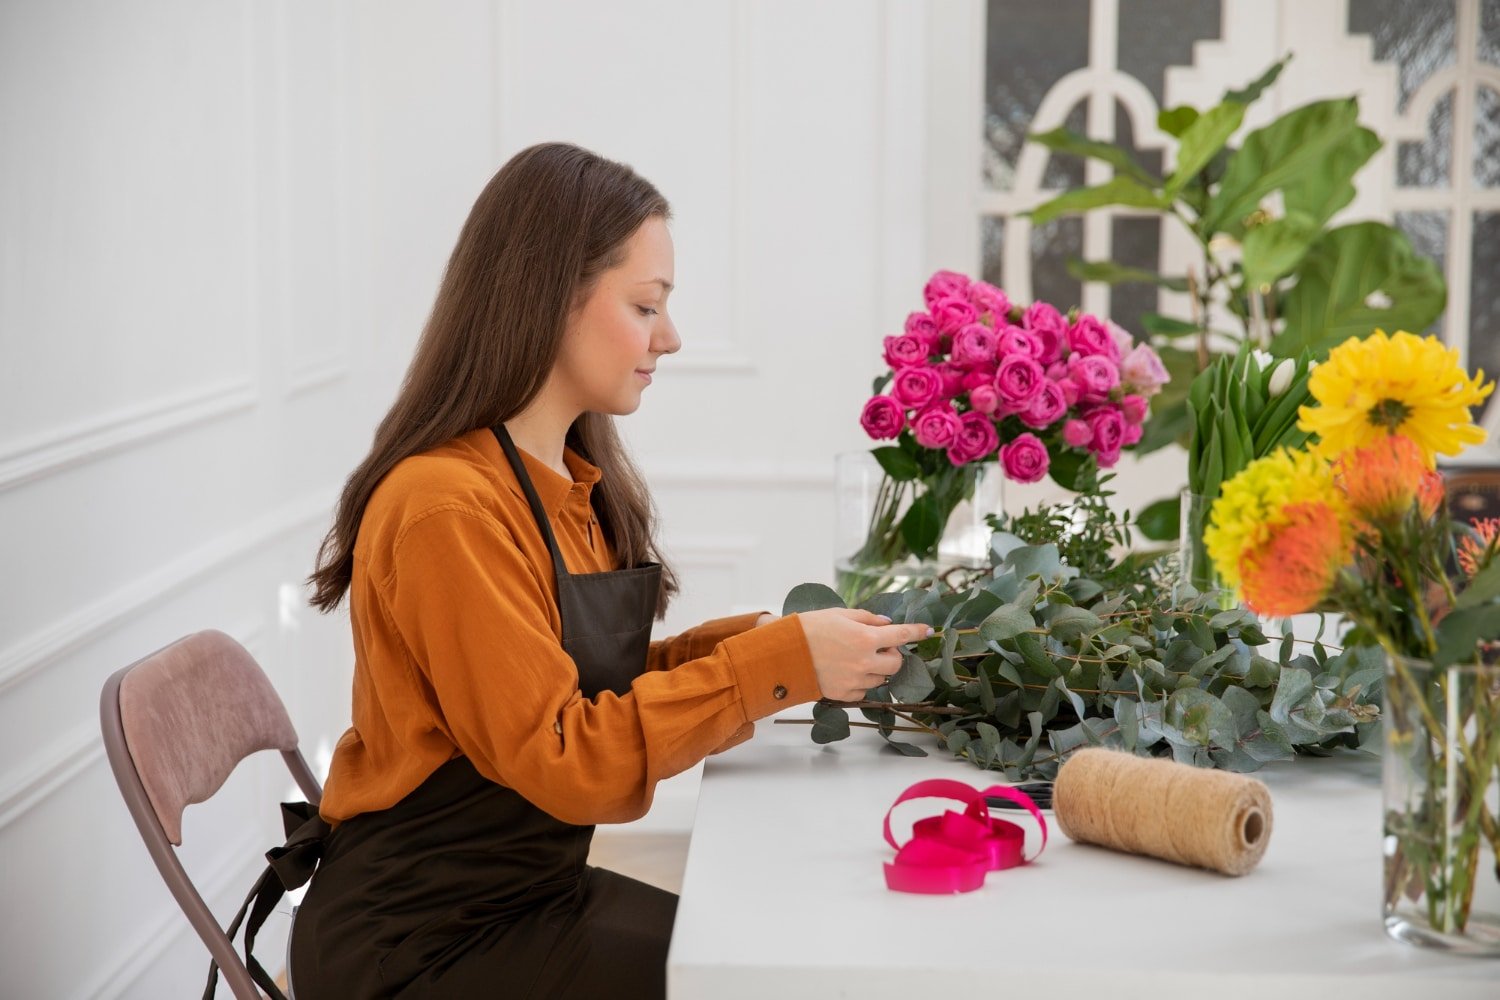 Send Beautiful Flowers Easily With FlowerAura [CPS] IN’s Online Flower Delivery Service